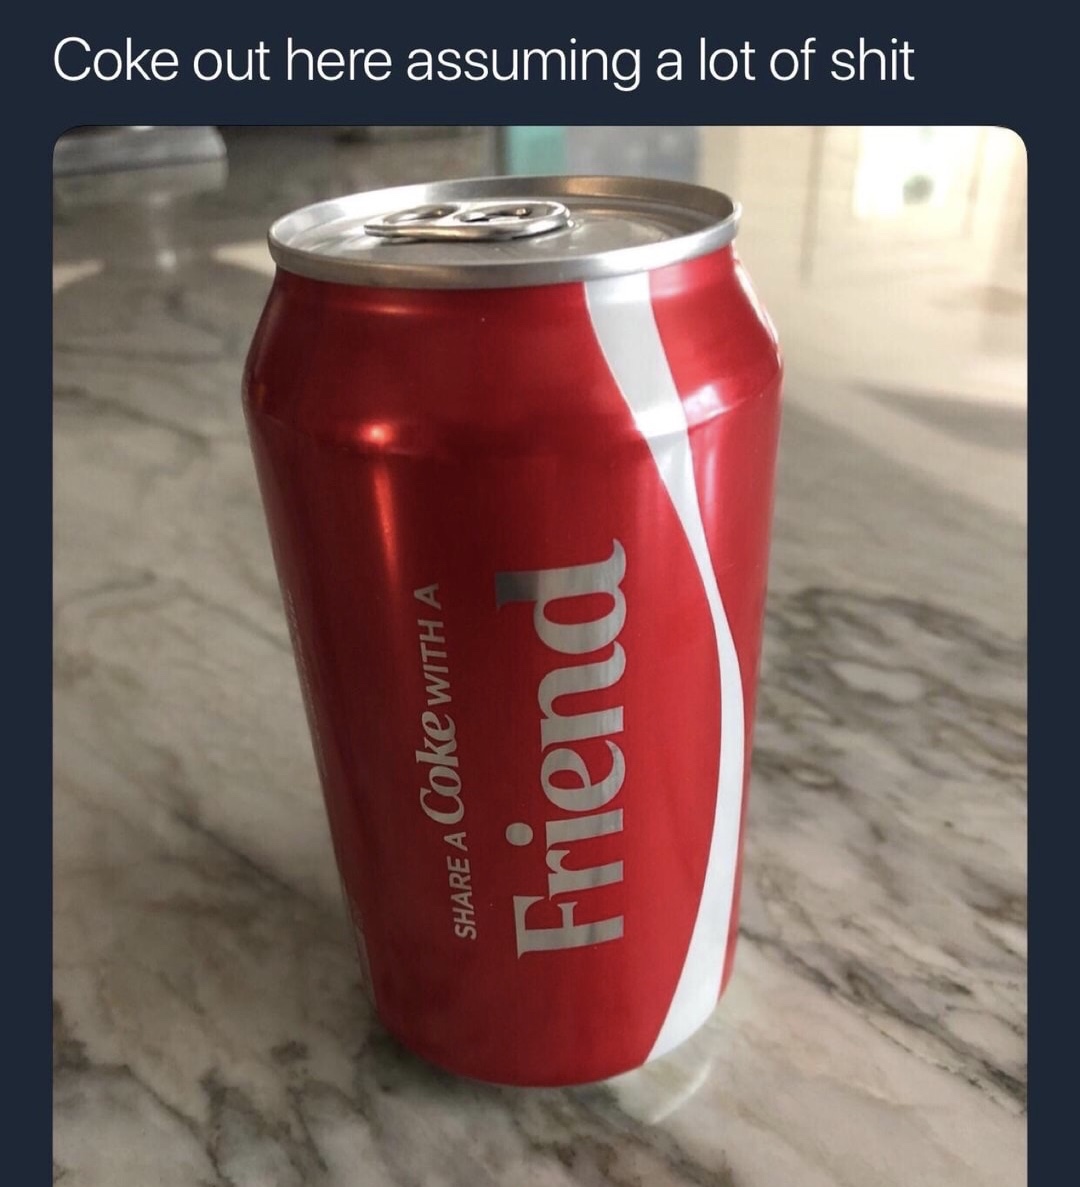 coca cola memes - Coke out here assuming a lot of shit A Coke With A Friena